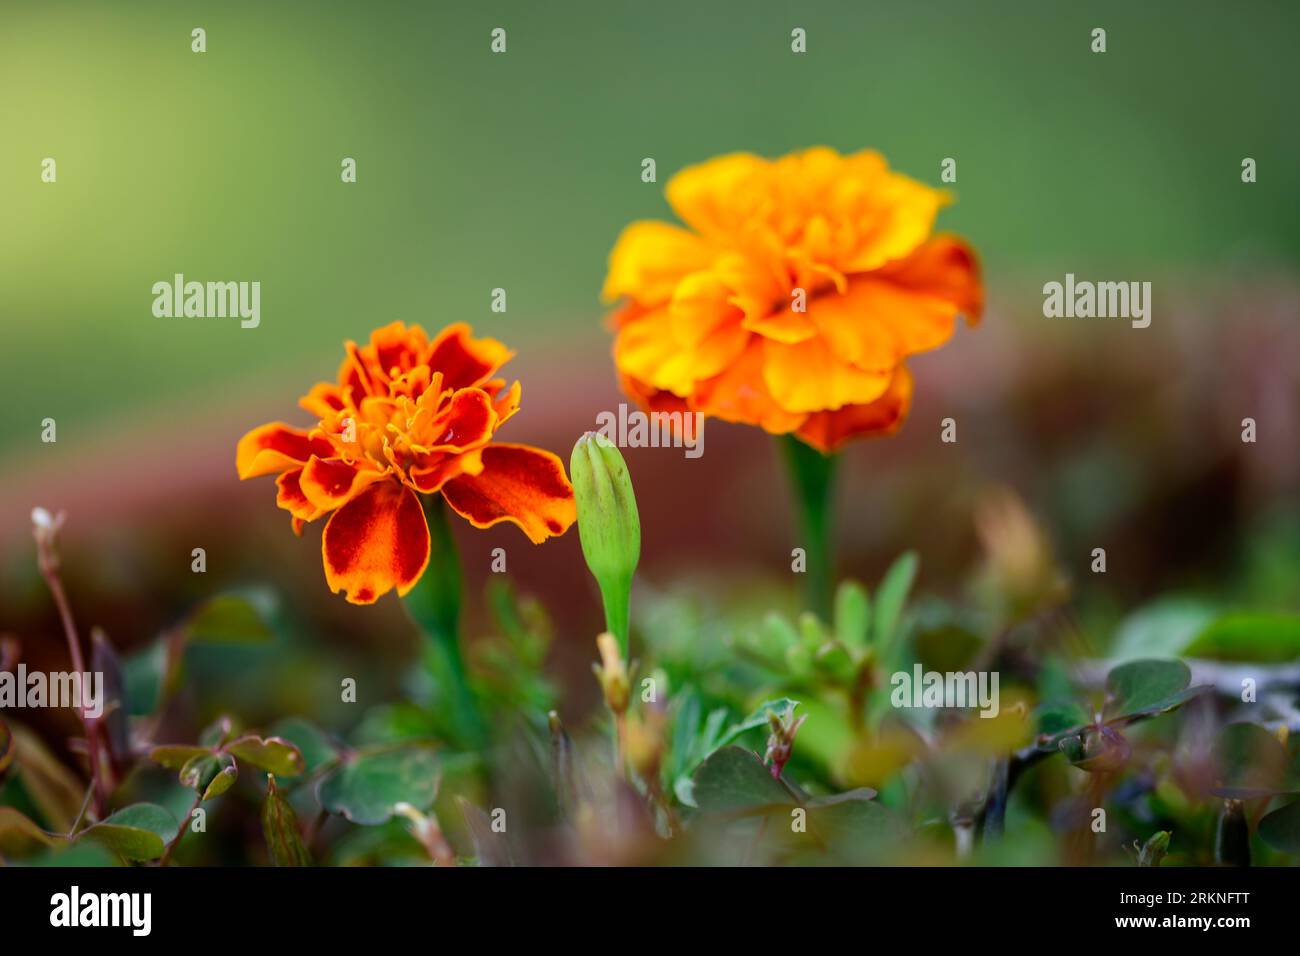 Tagetes patula flowers in brown pot in garden. Stock Photo